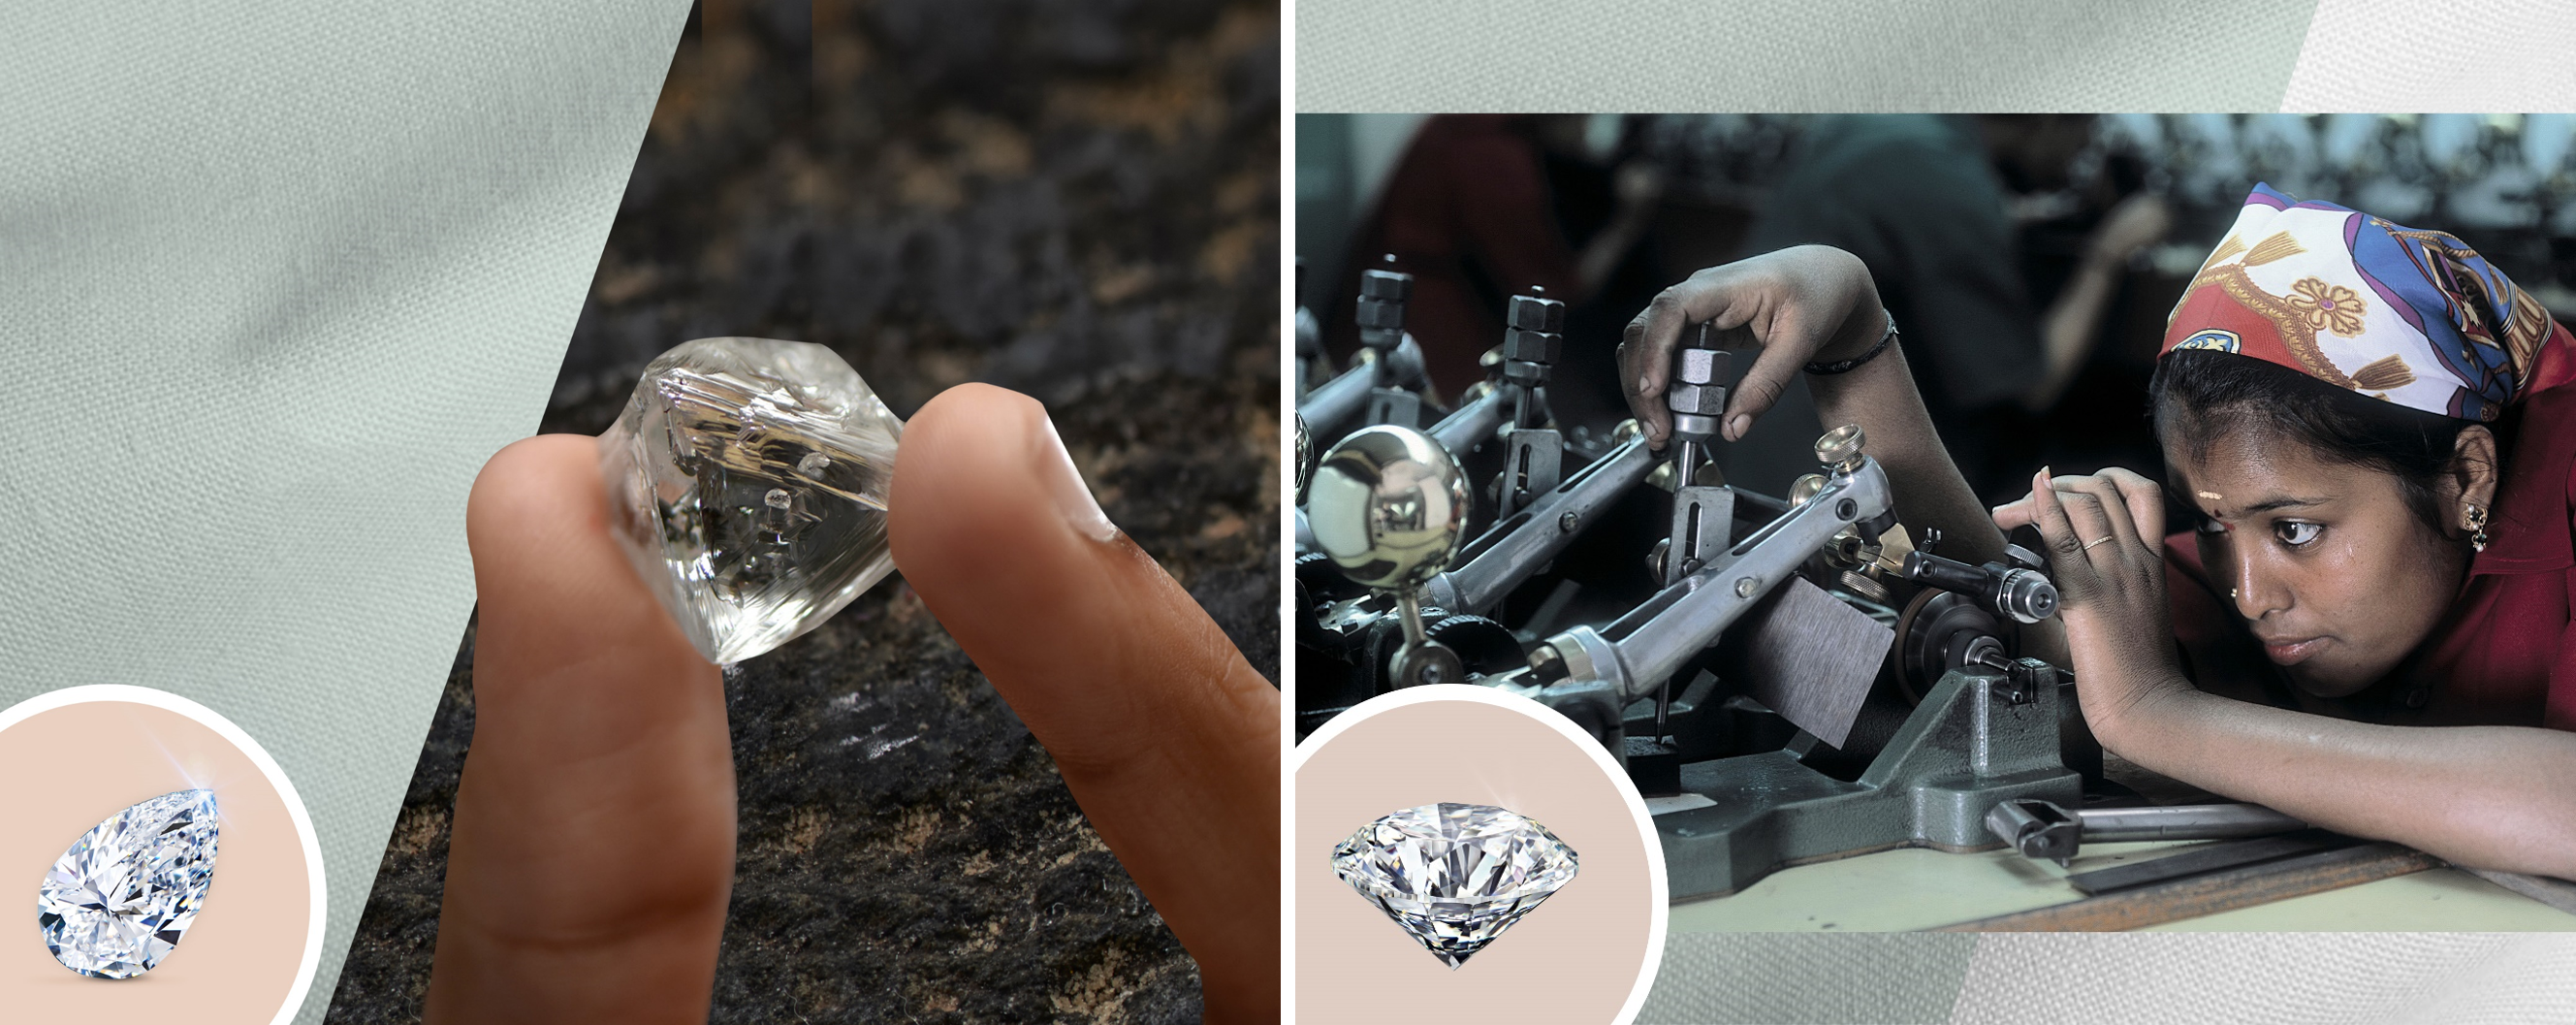 Diamonds cut and polished by skilled karigars